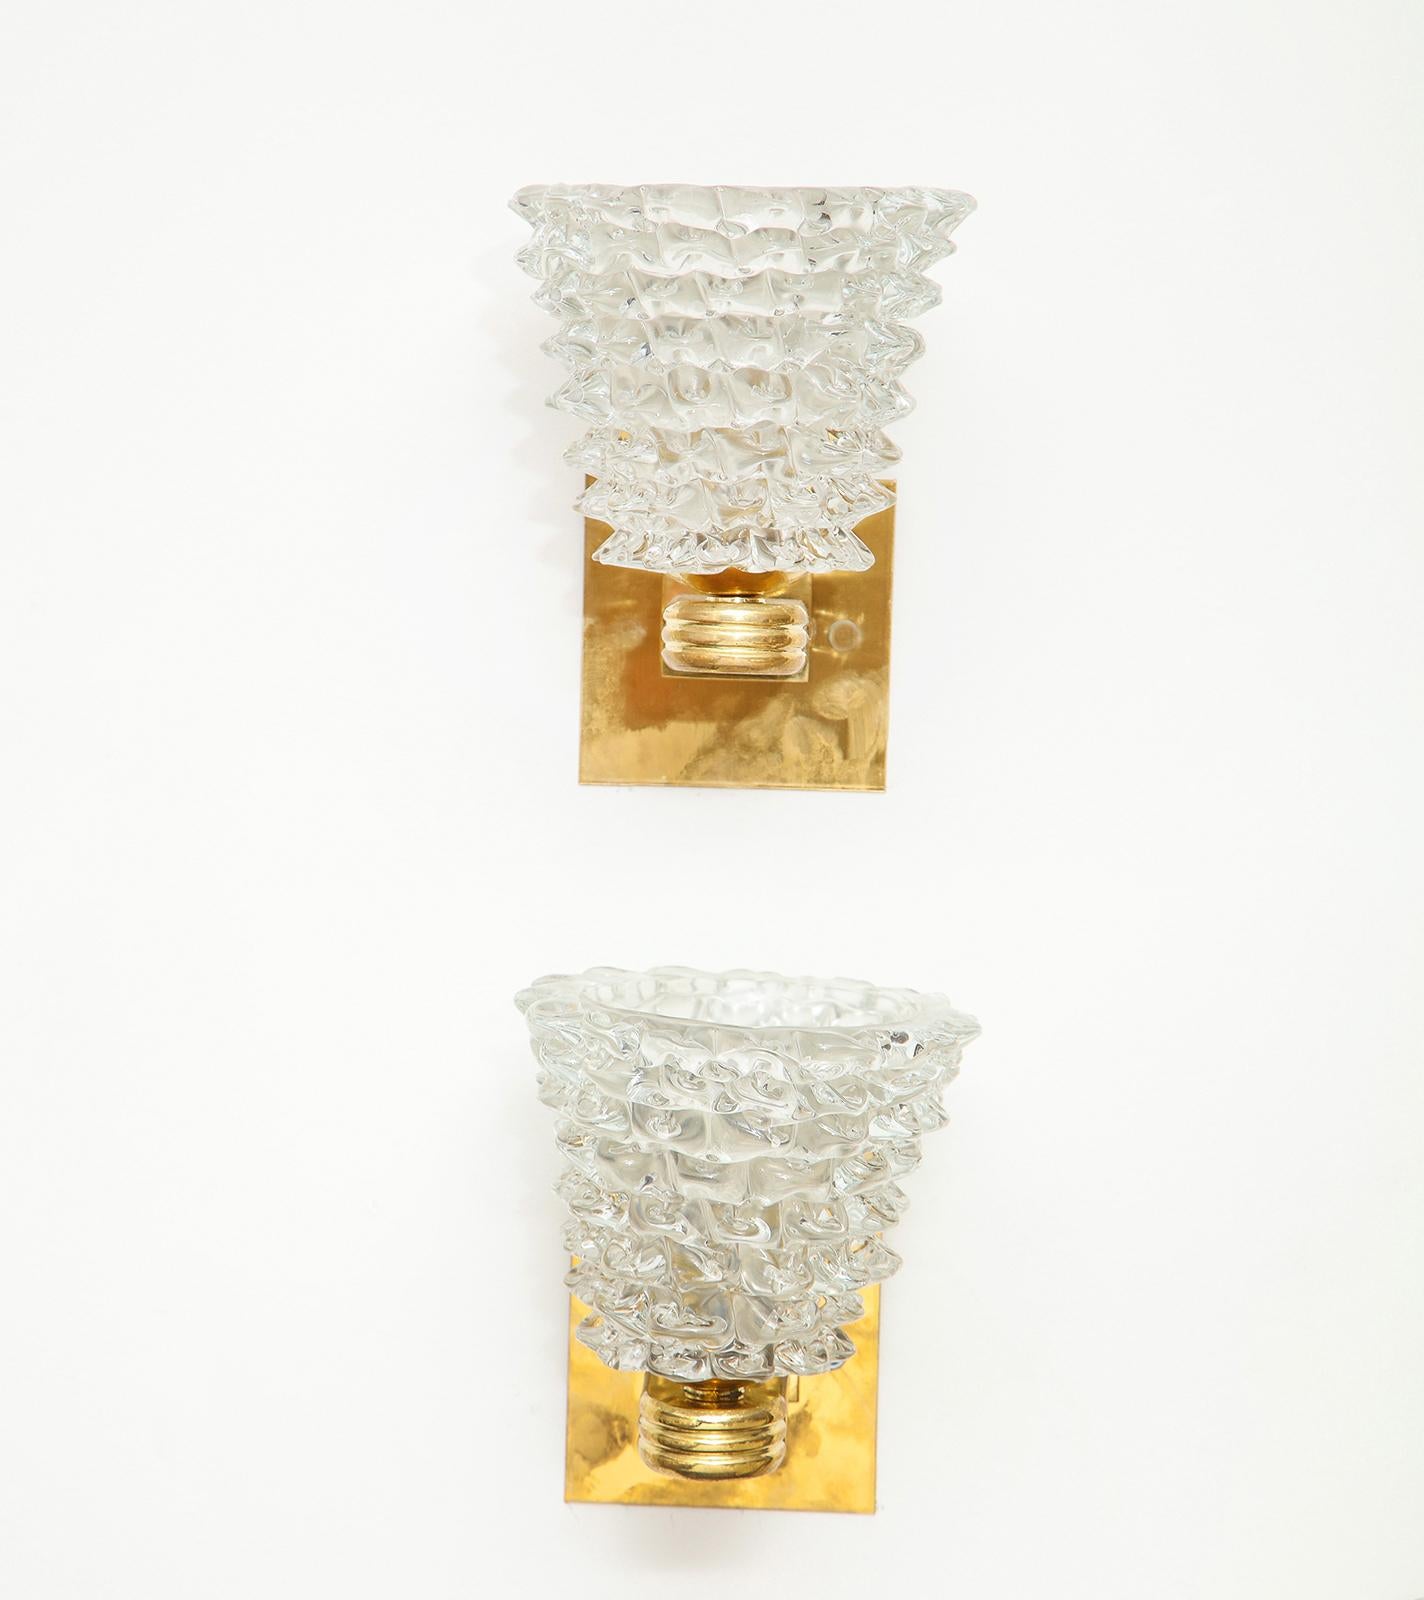 North American Pair of Bespoke Murano Glass Sconces For Sale